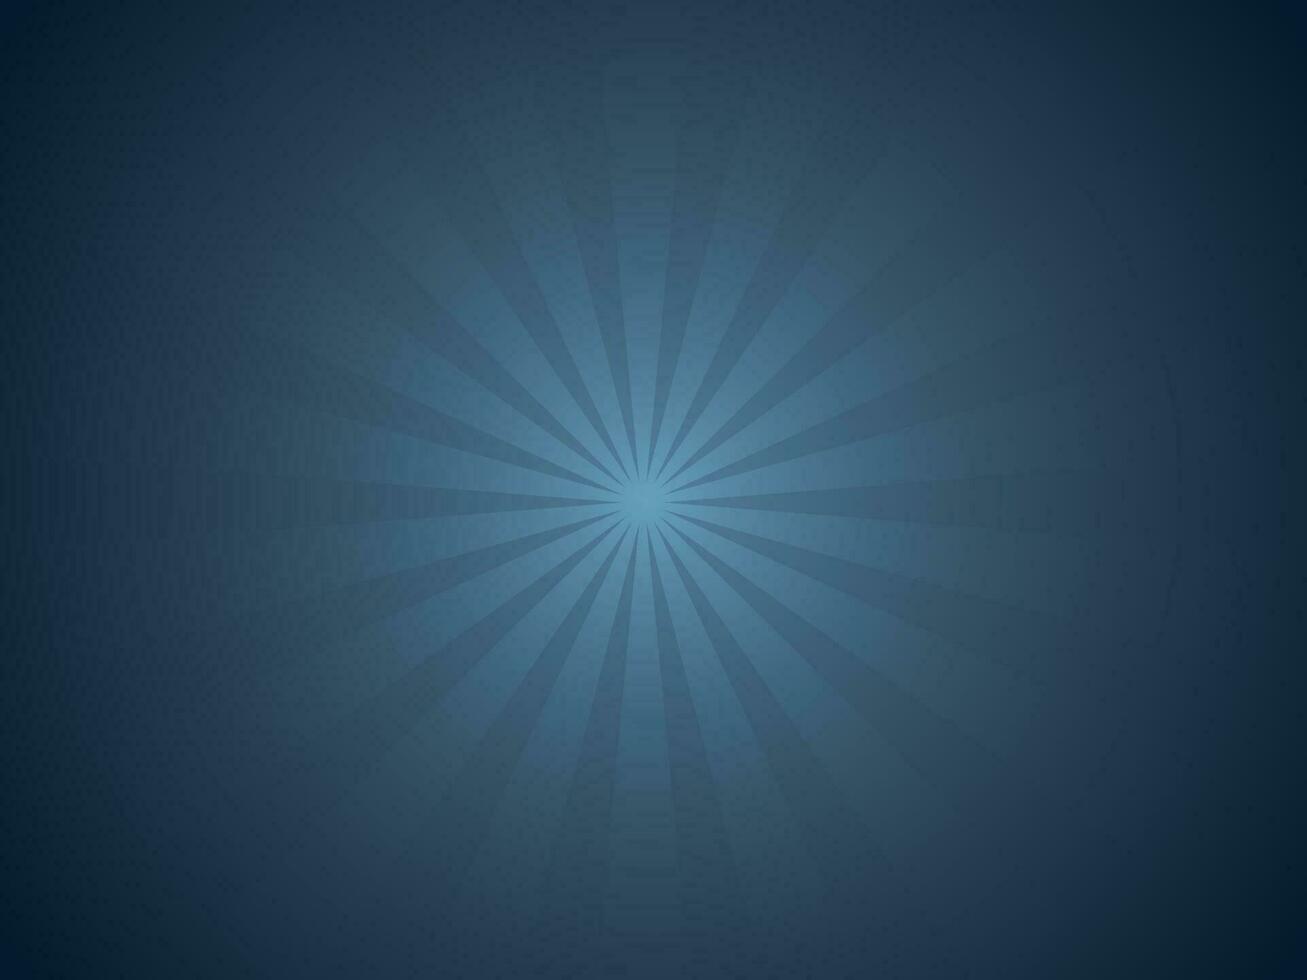 Abstract blue sun rays background. vector